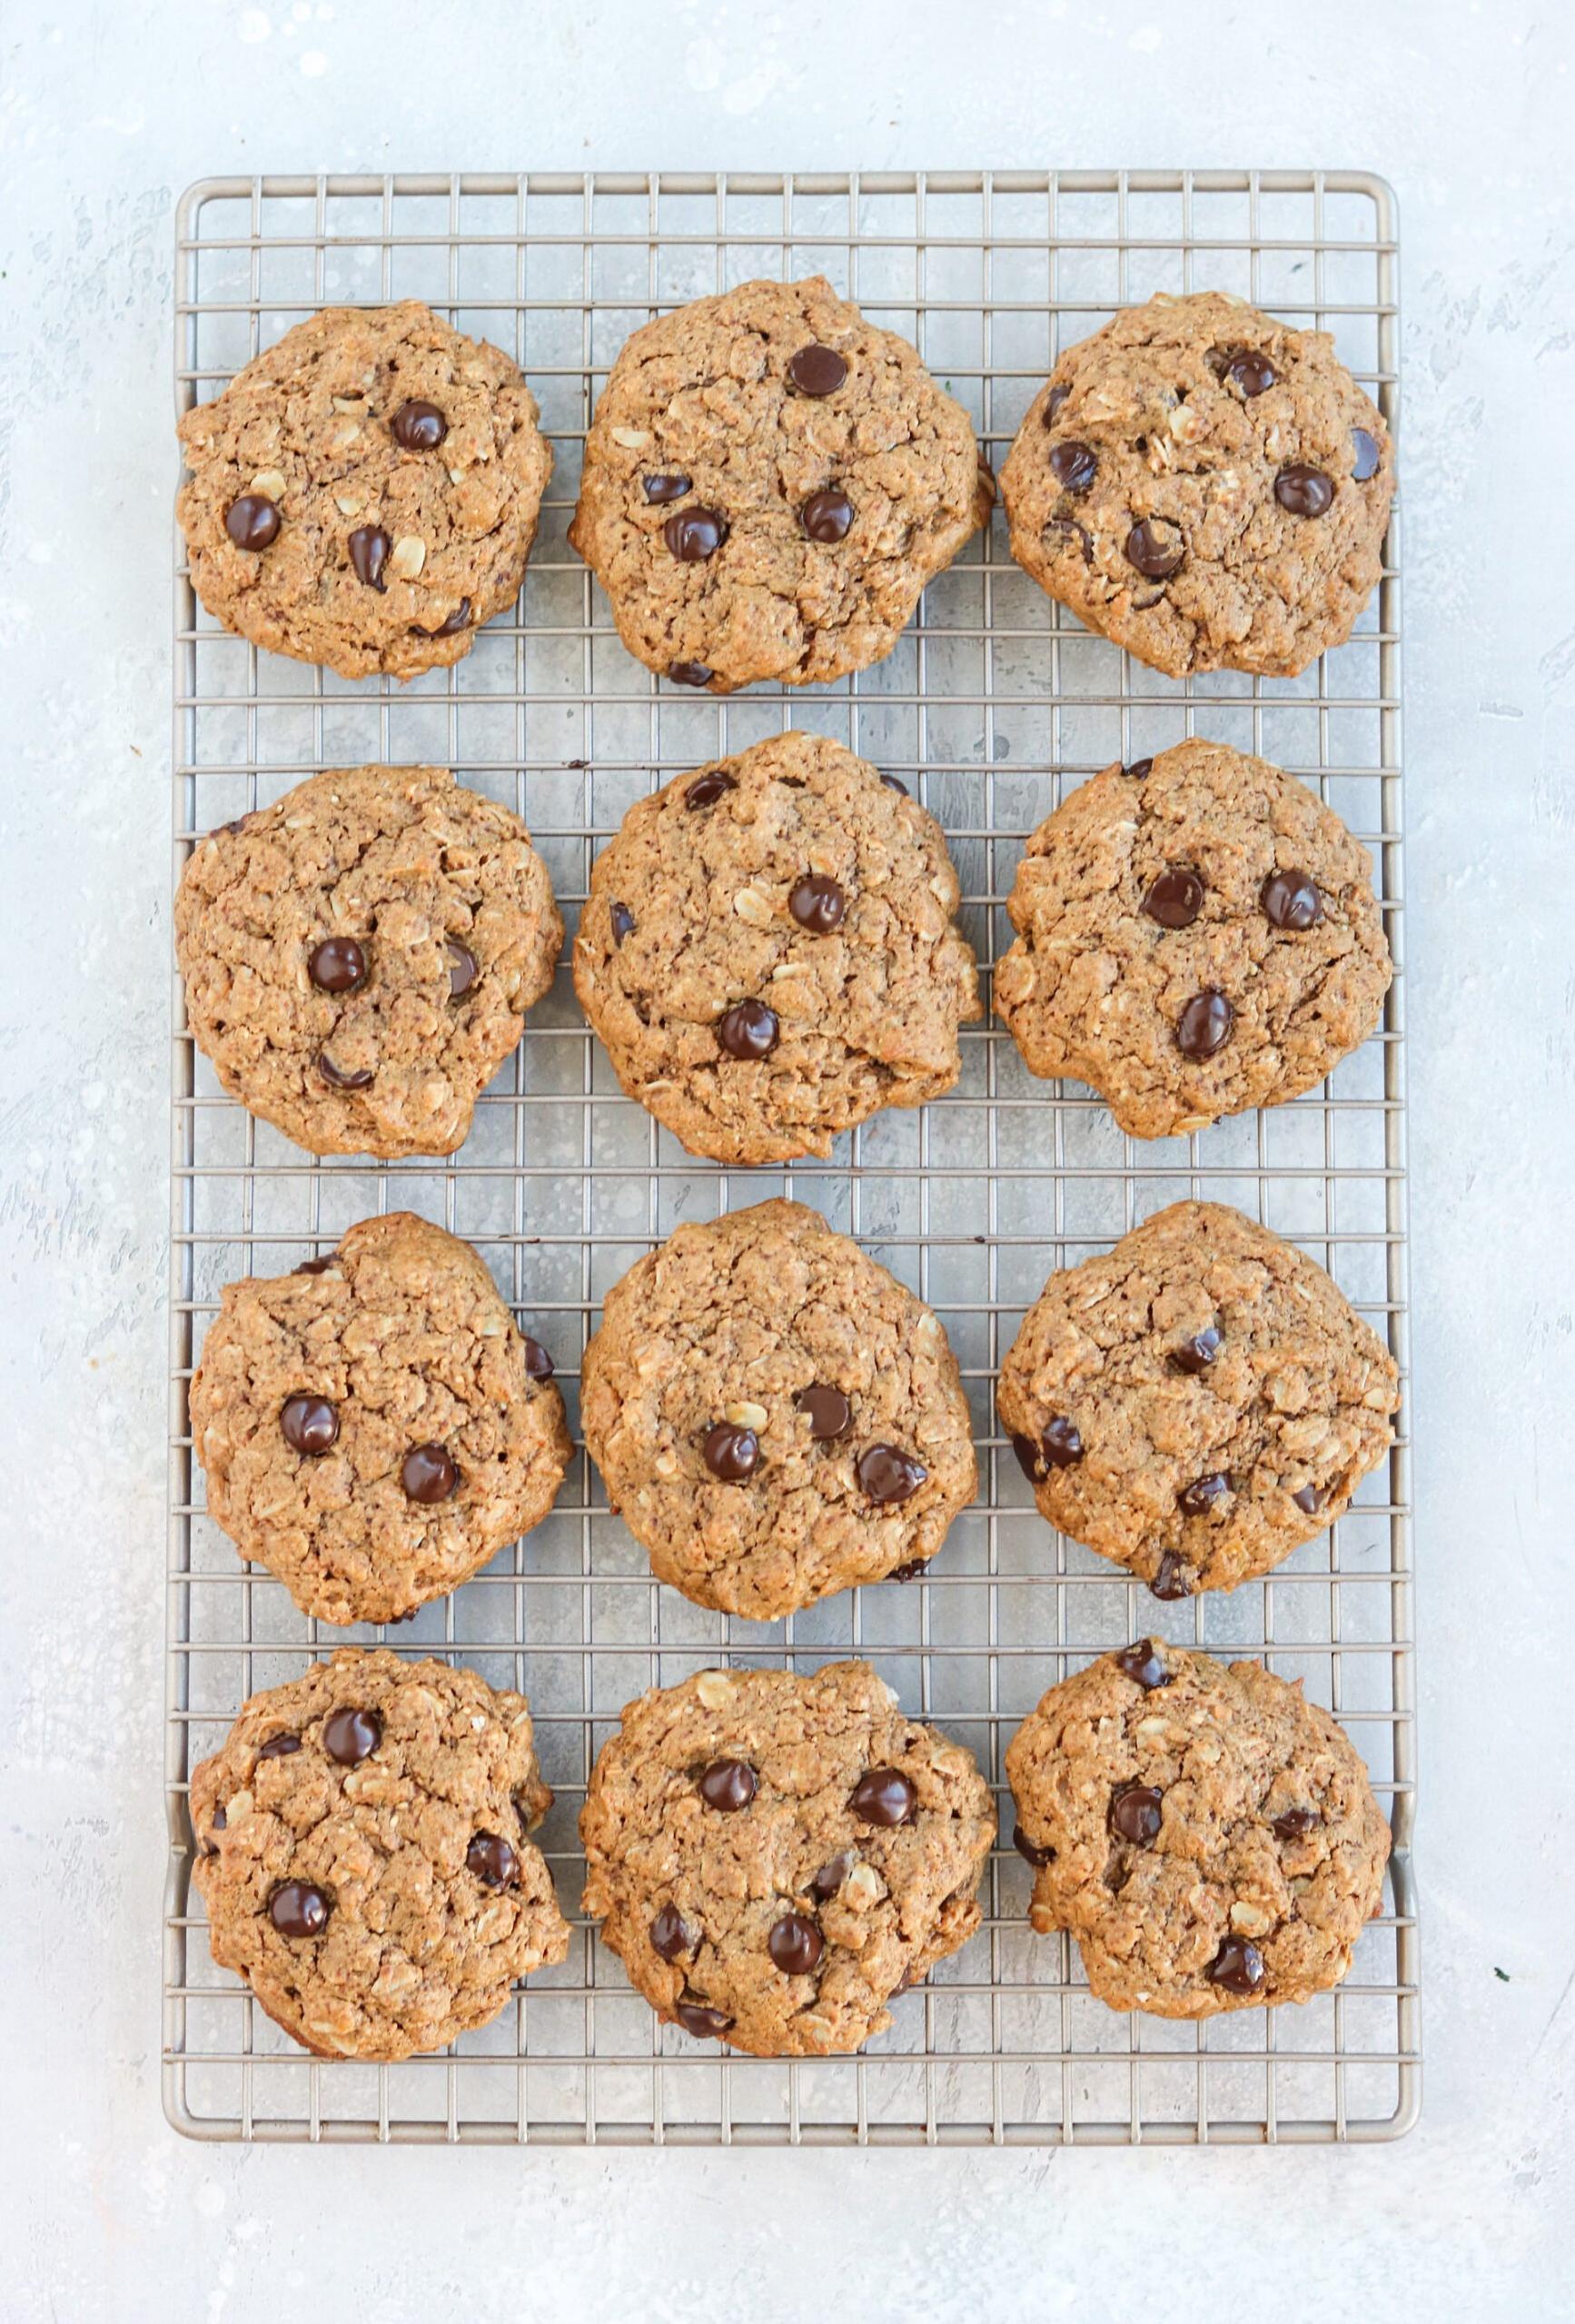  Packed with fiber and nutrients from the oats and nuts, these cookies are the perfect snack to satisfy your sweet tooth.